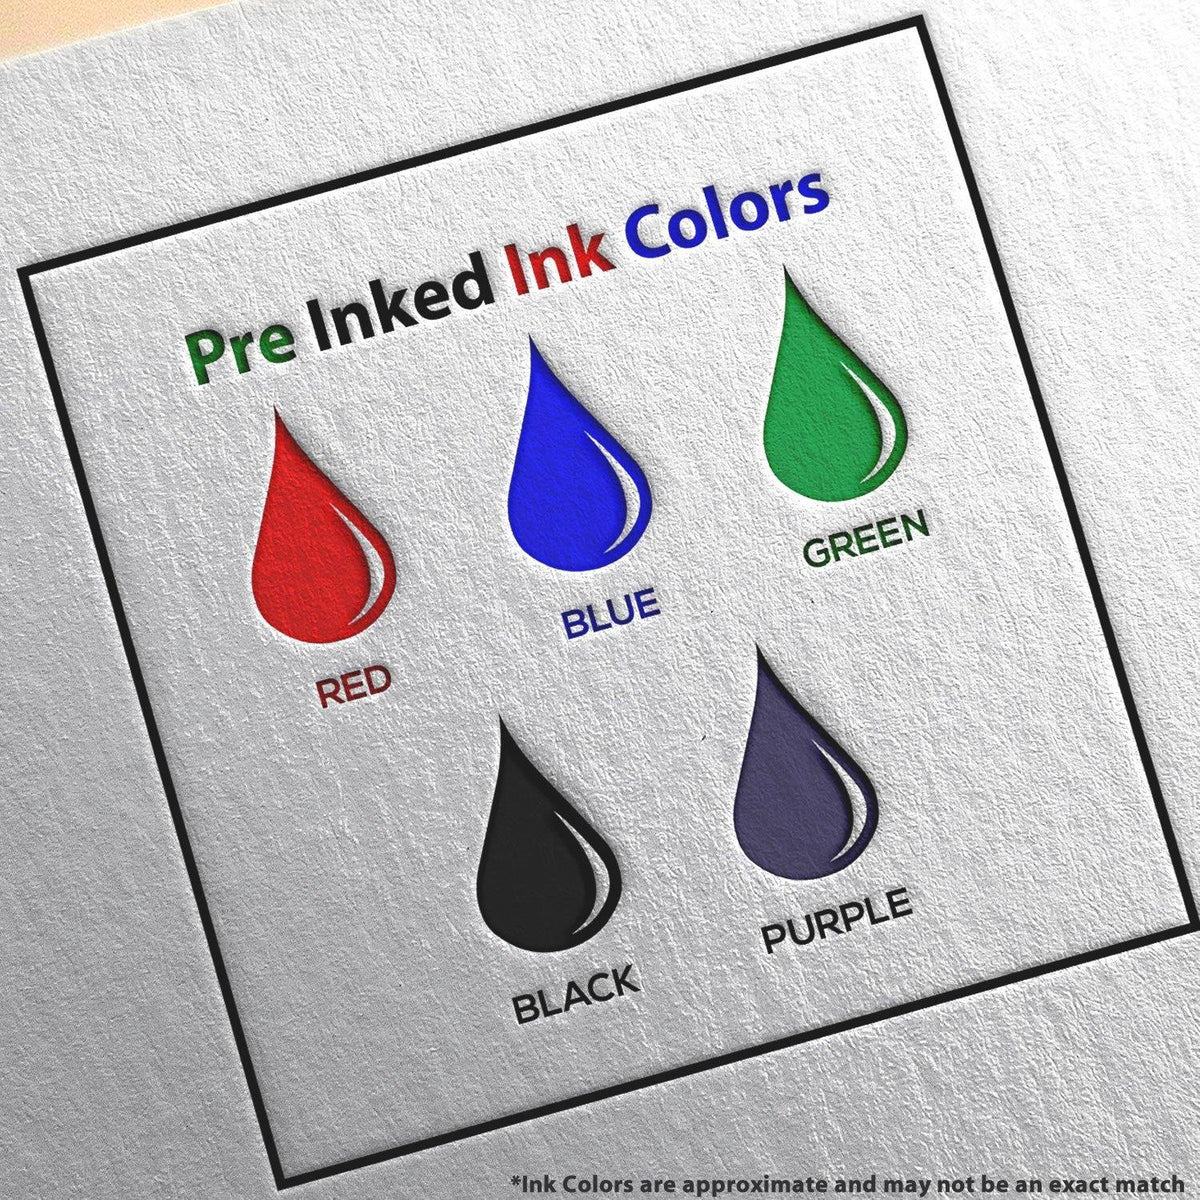 Slim Pre-Inked Faxed with Machine Stamp Ink Color Options